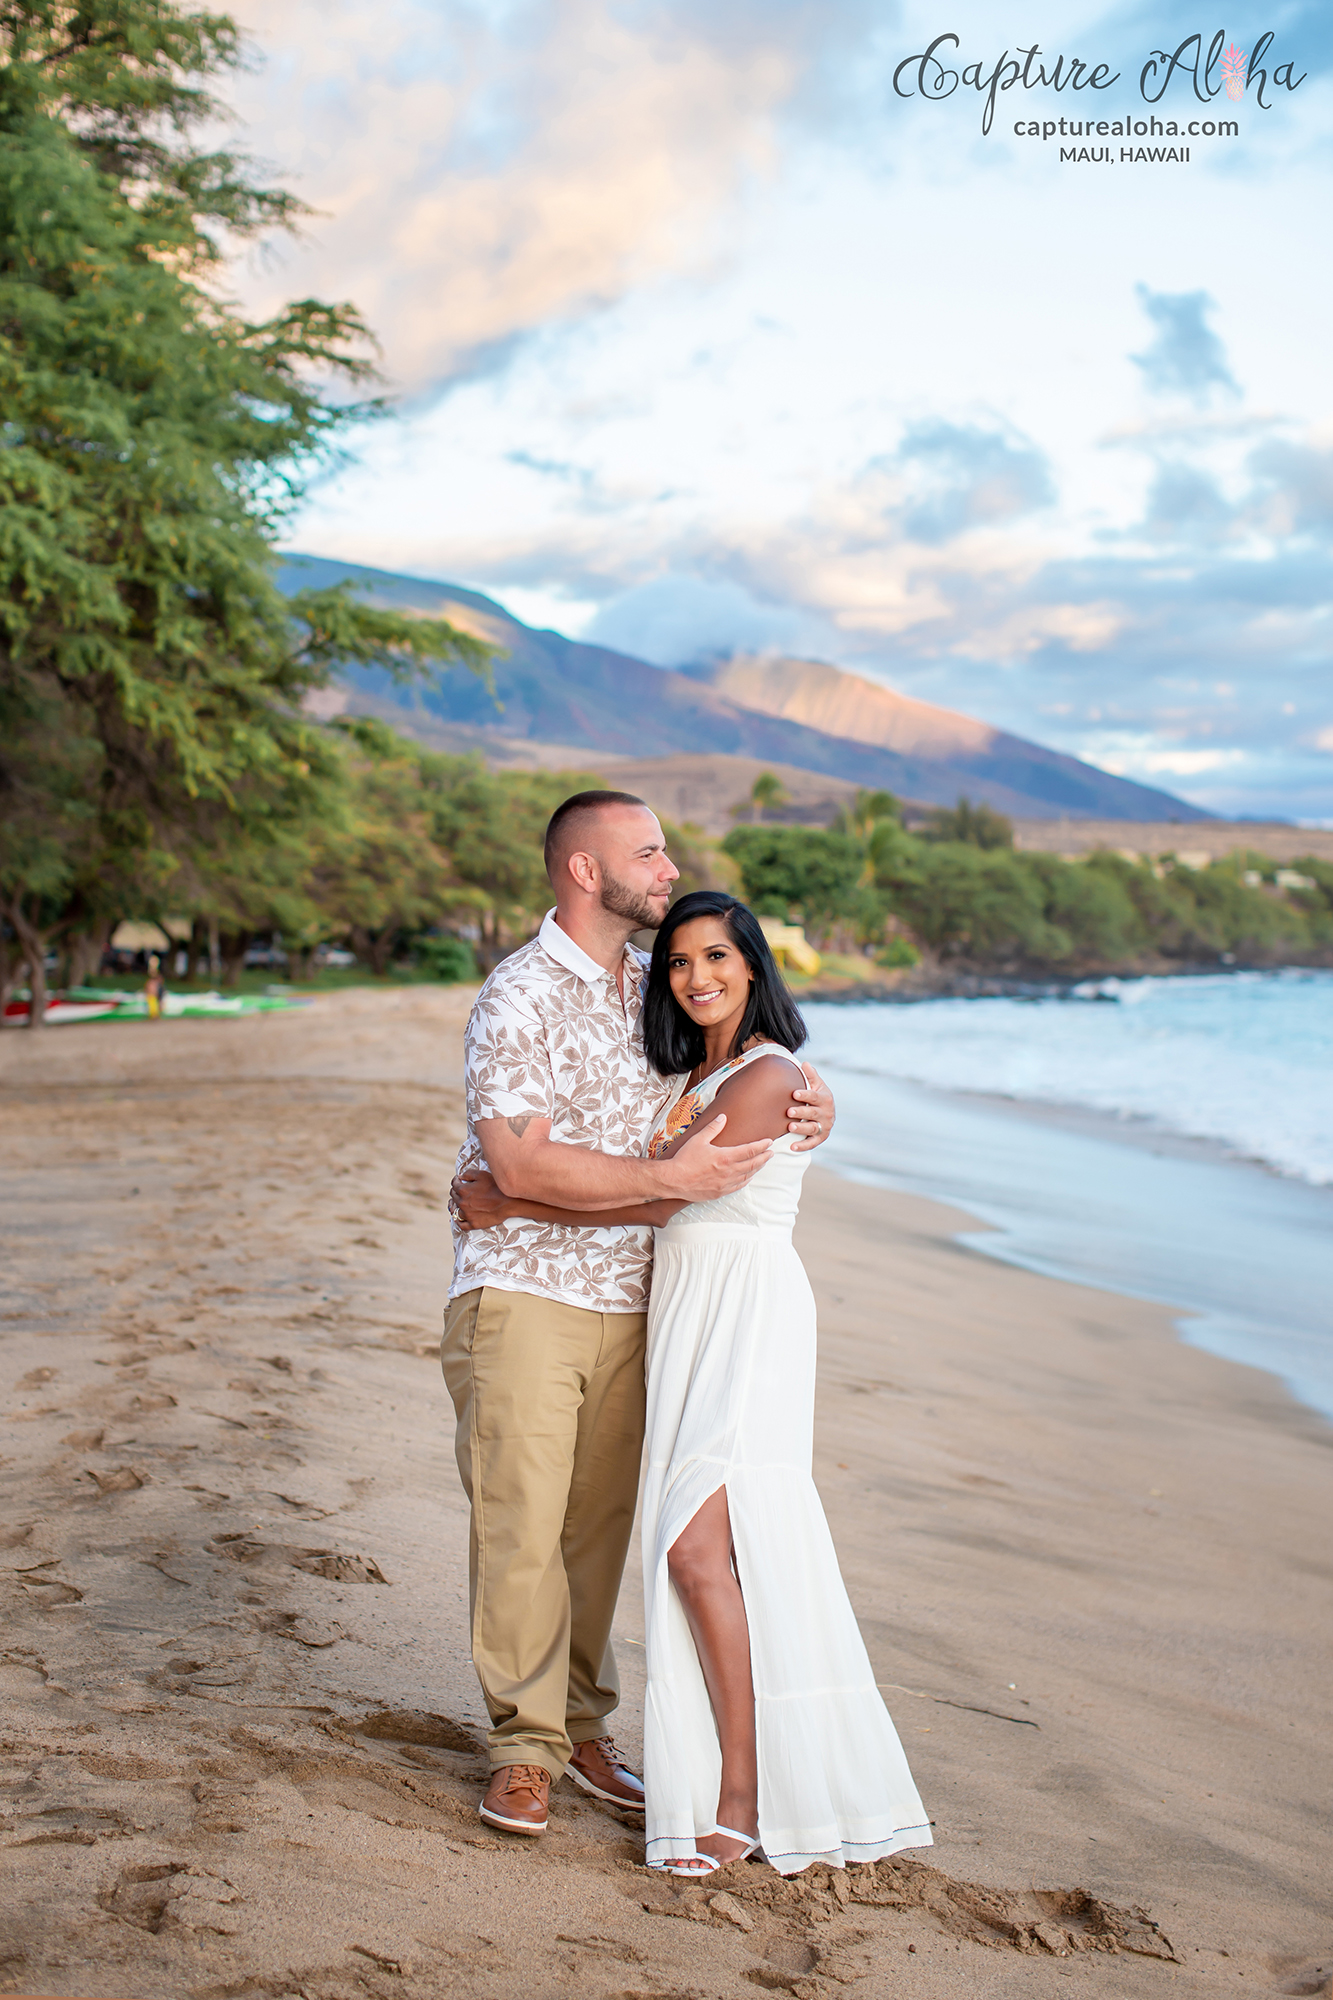 Couples photography on the beach in Maui during sunset